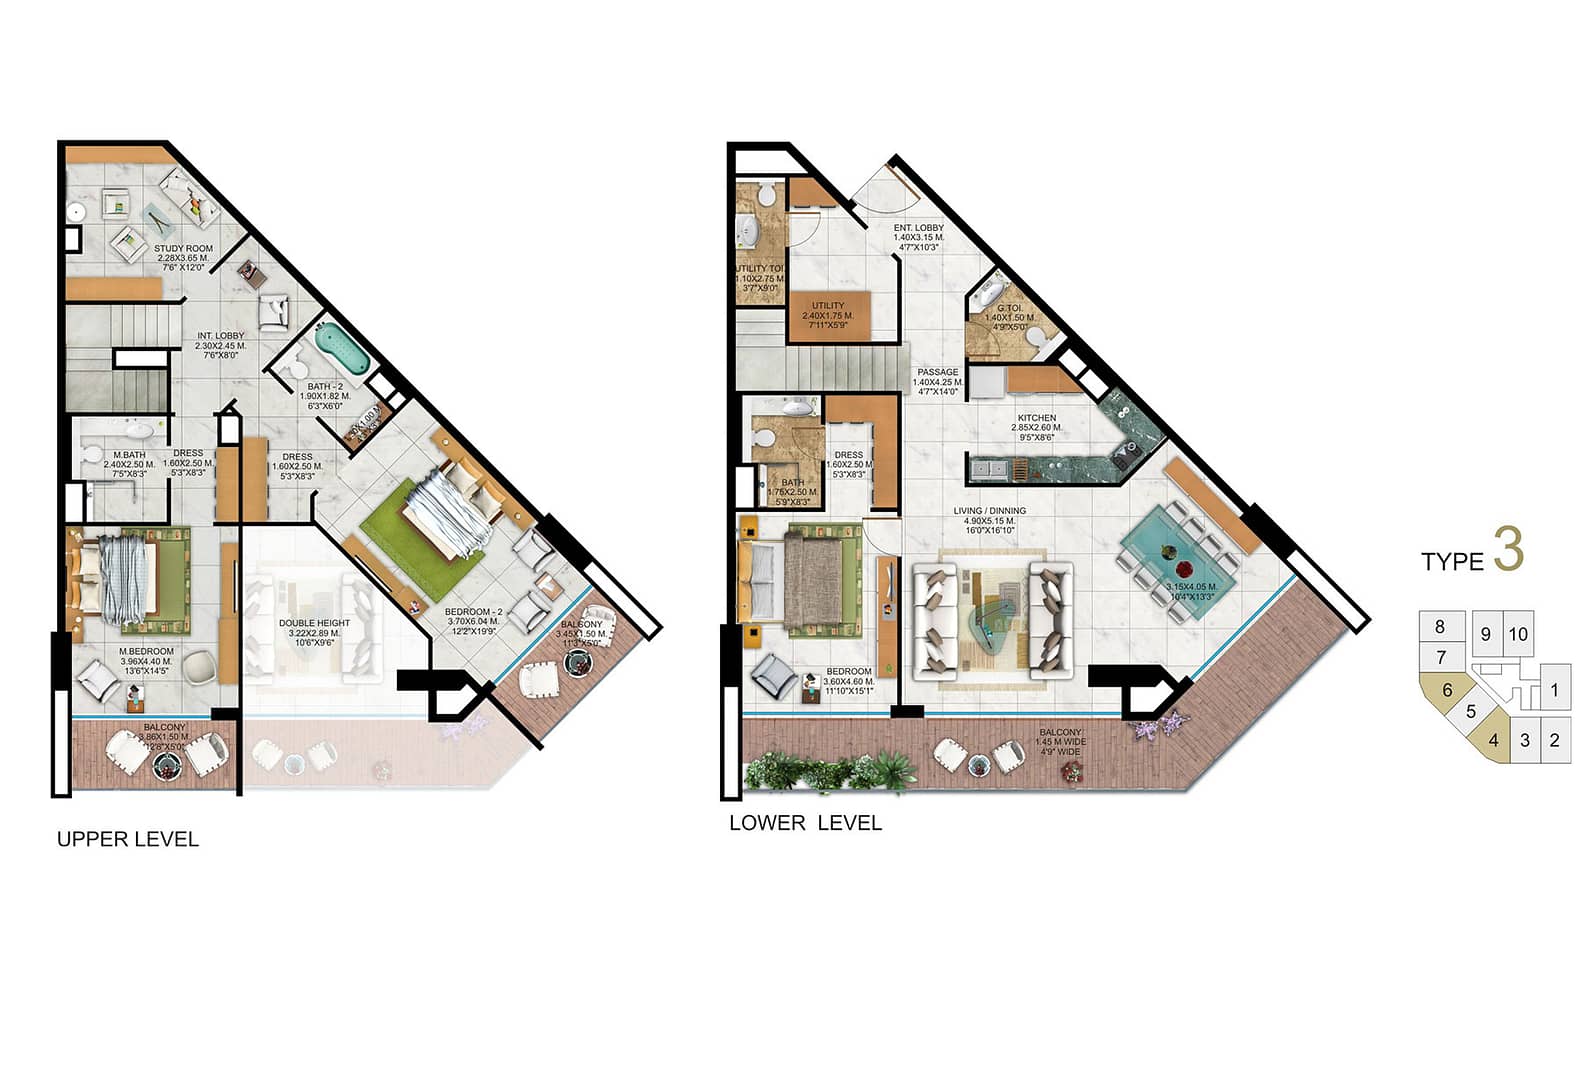 2D Plan, Flats for Sale, Flats for Rent, 2 Bedroom Apartment for Sale, 1 Bedroom Apartment for Sale